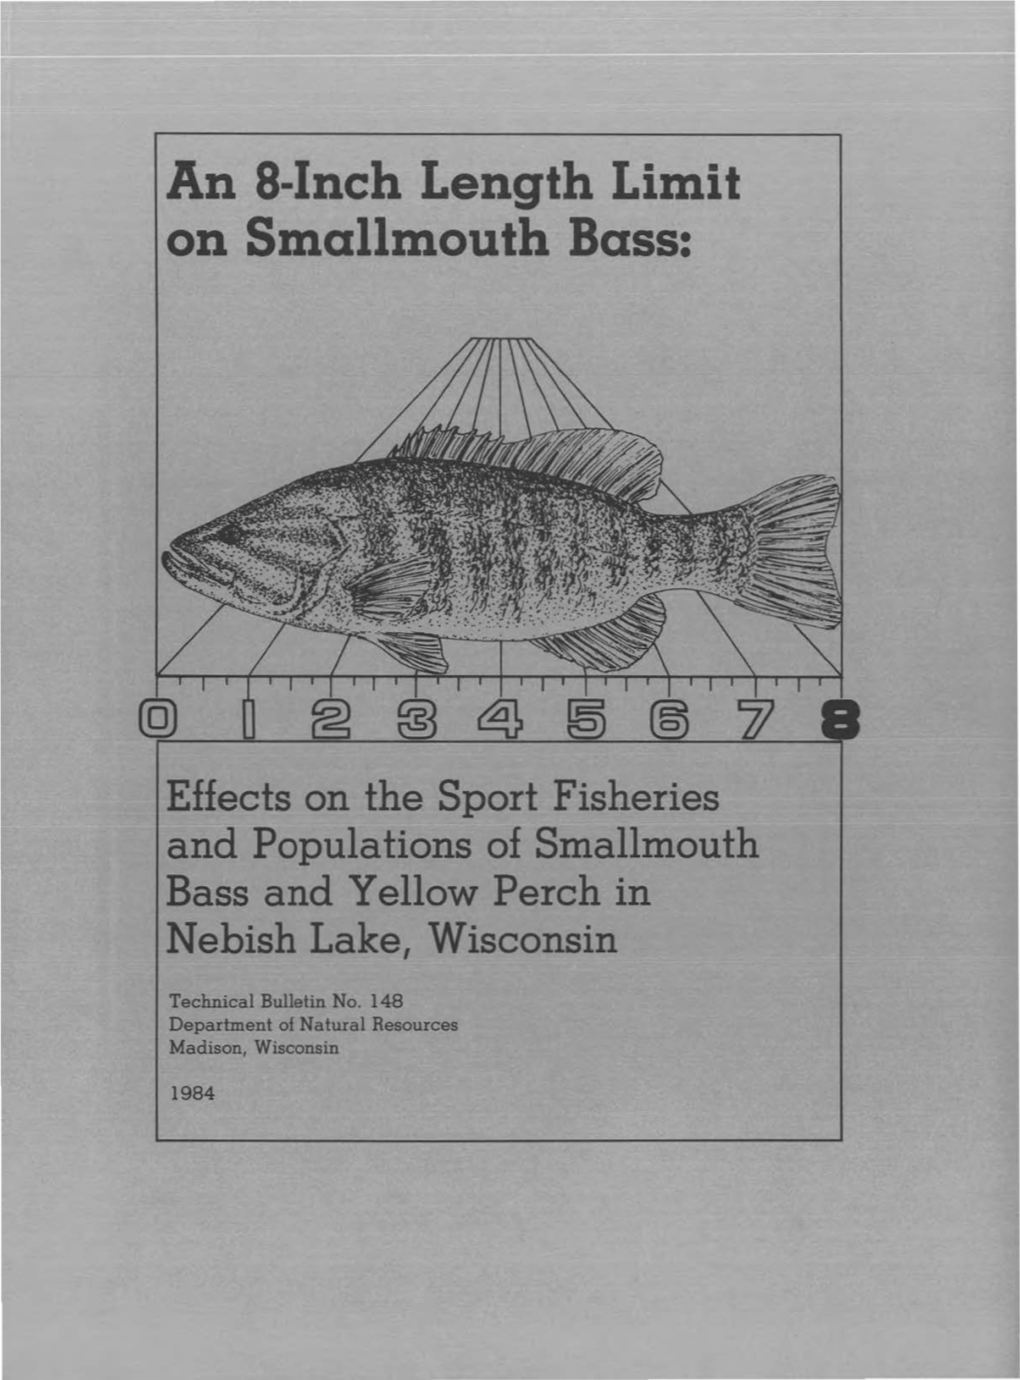 An 8-Inch Length Limit on Smallmouth Bass